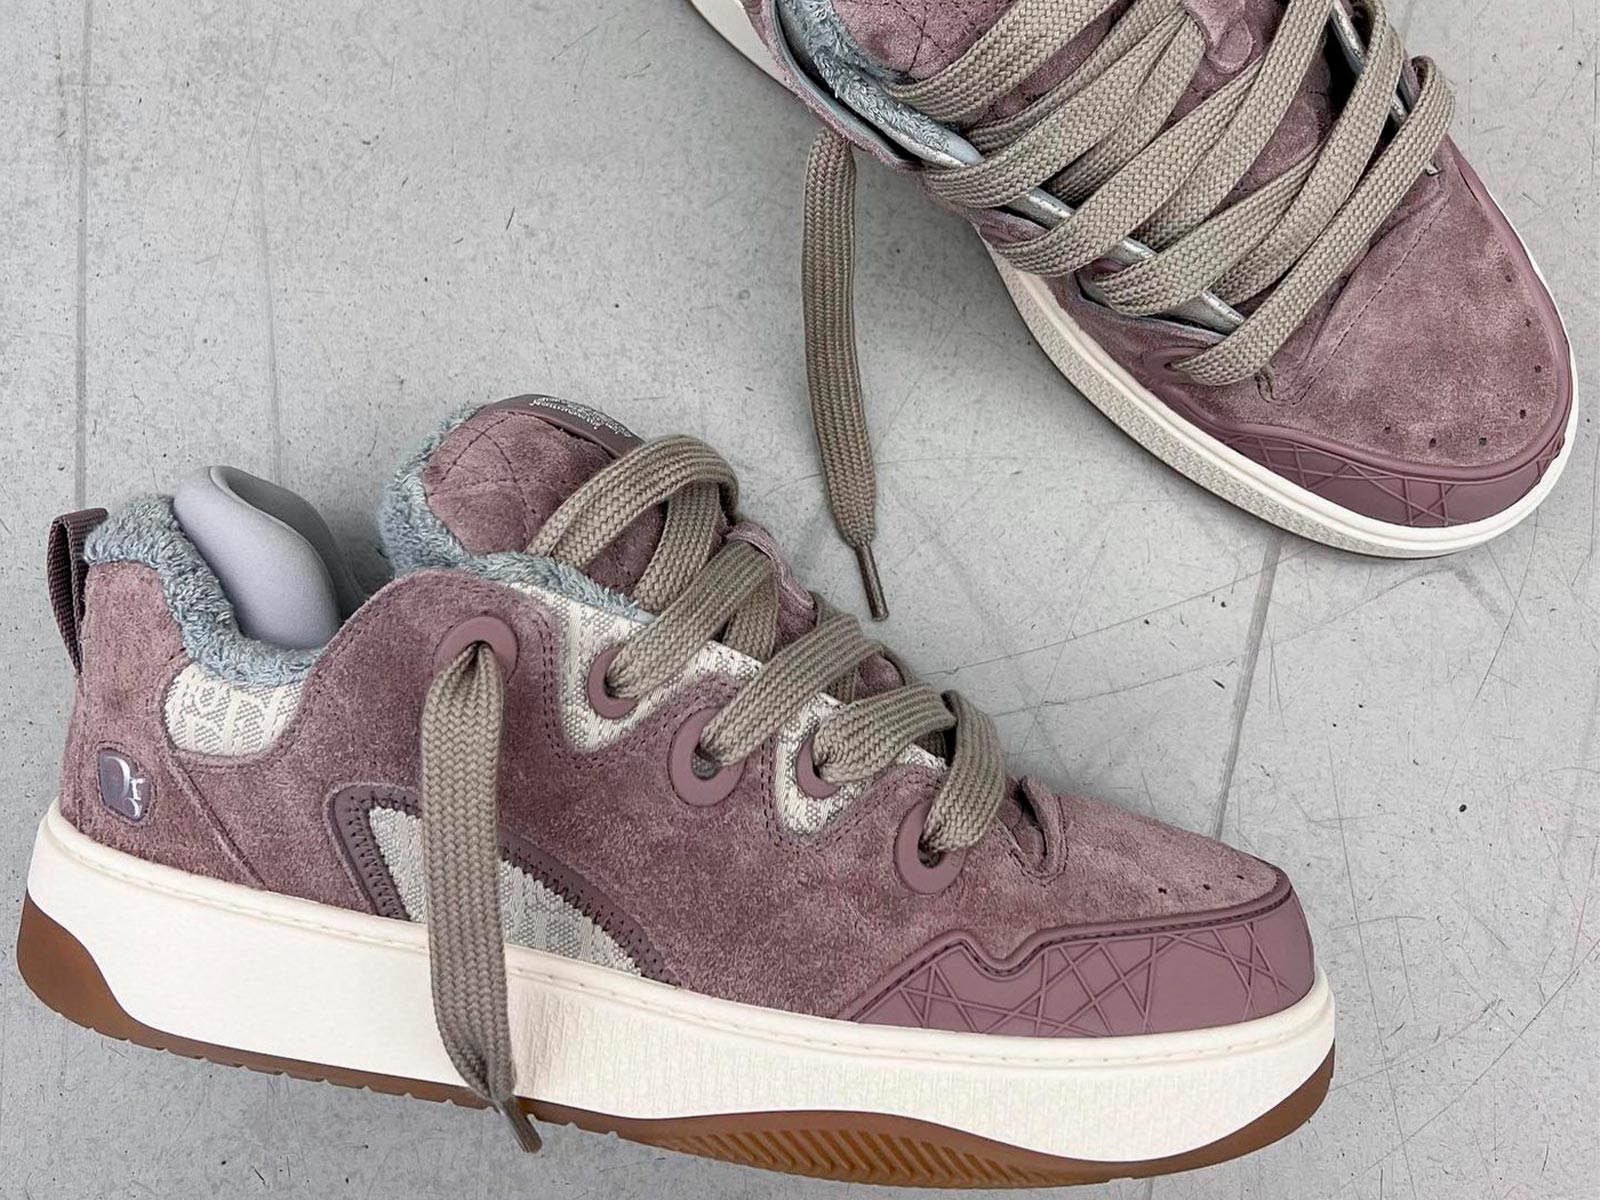 More details about the ERL x Dior B9S Skate